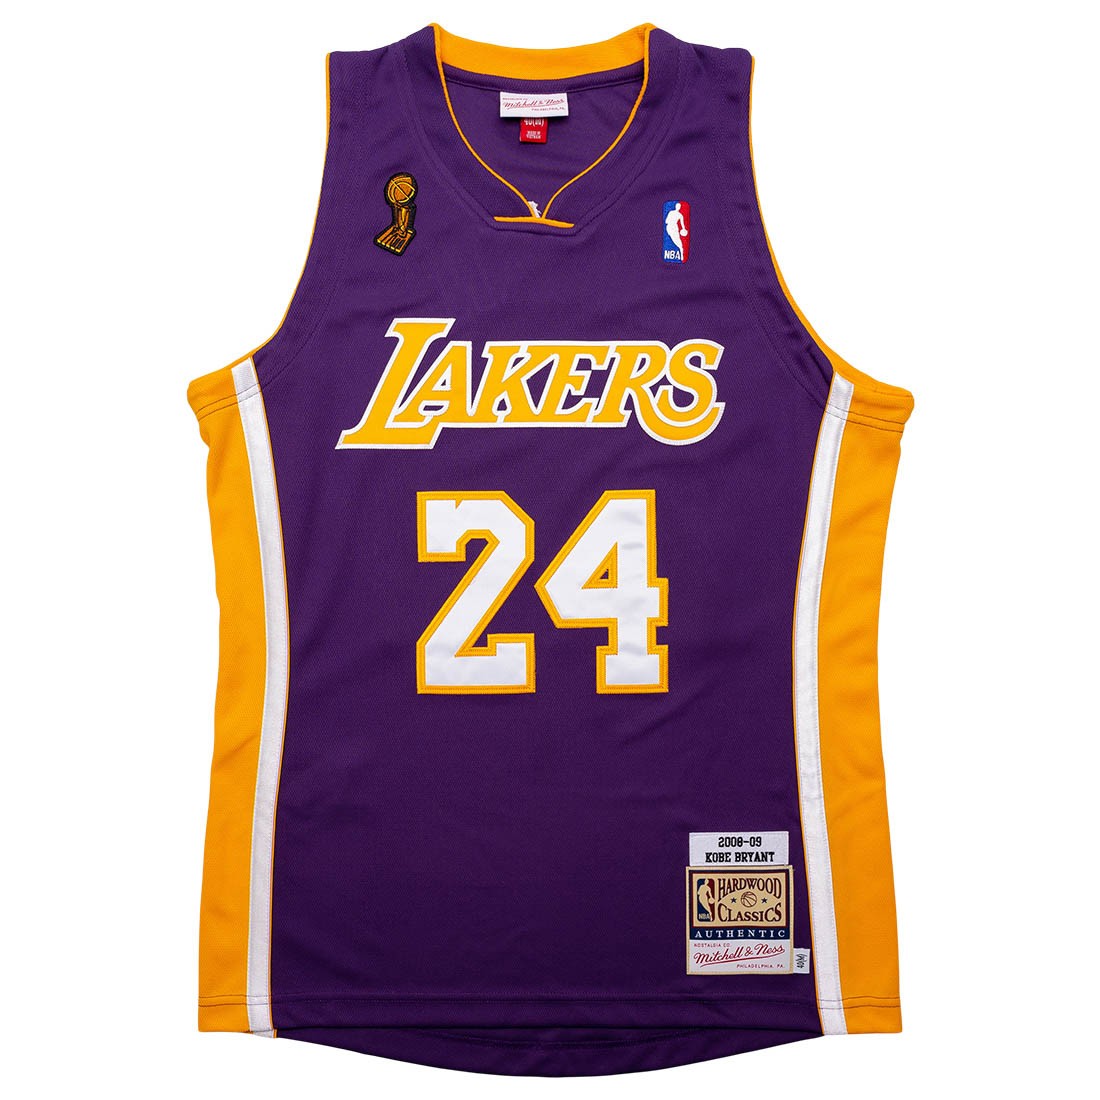 Mitchell And Ness Men NBA Los Angeles Lakers Road Finals 2008-09 Kobe Bryant Authentic Jersey (purple)